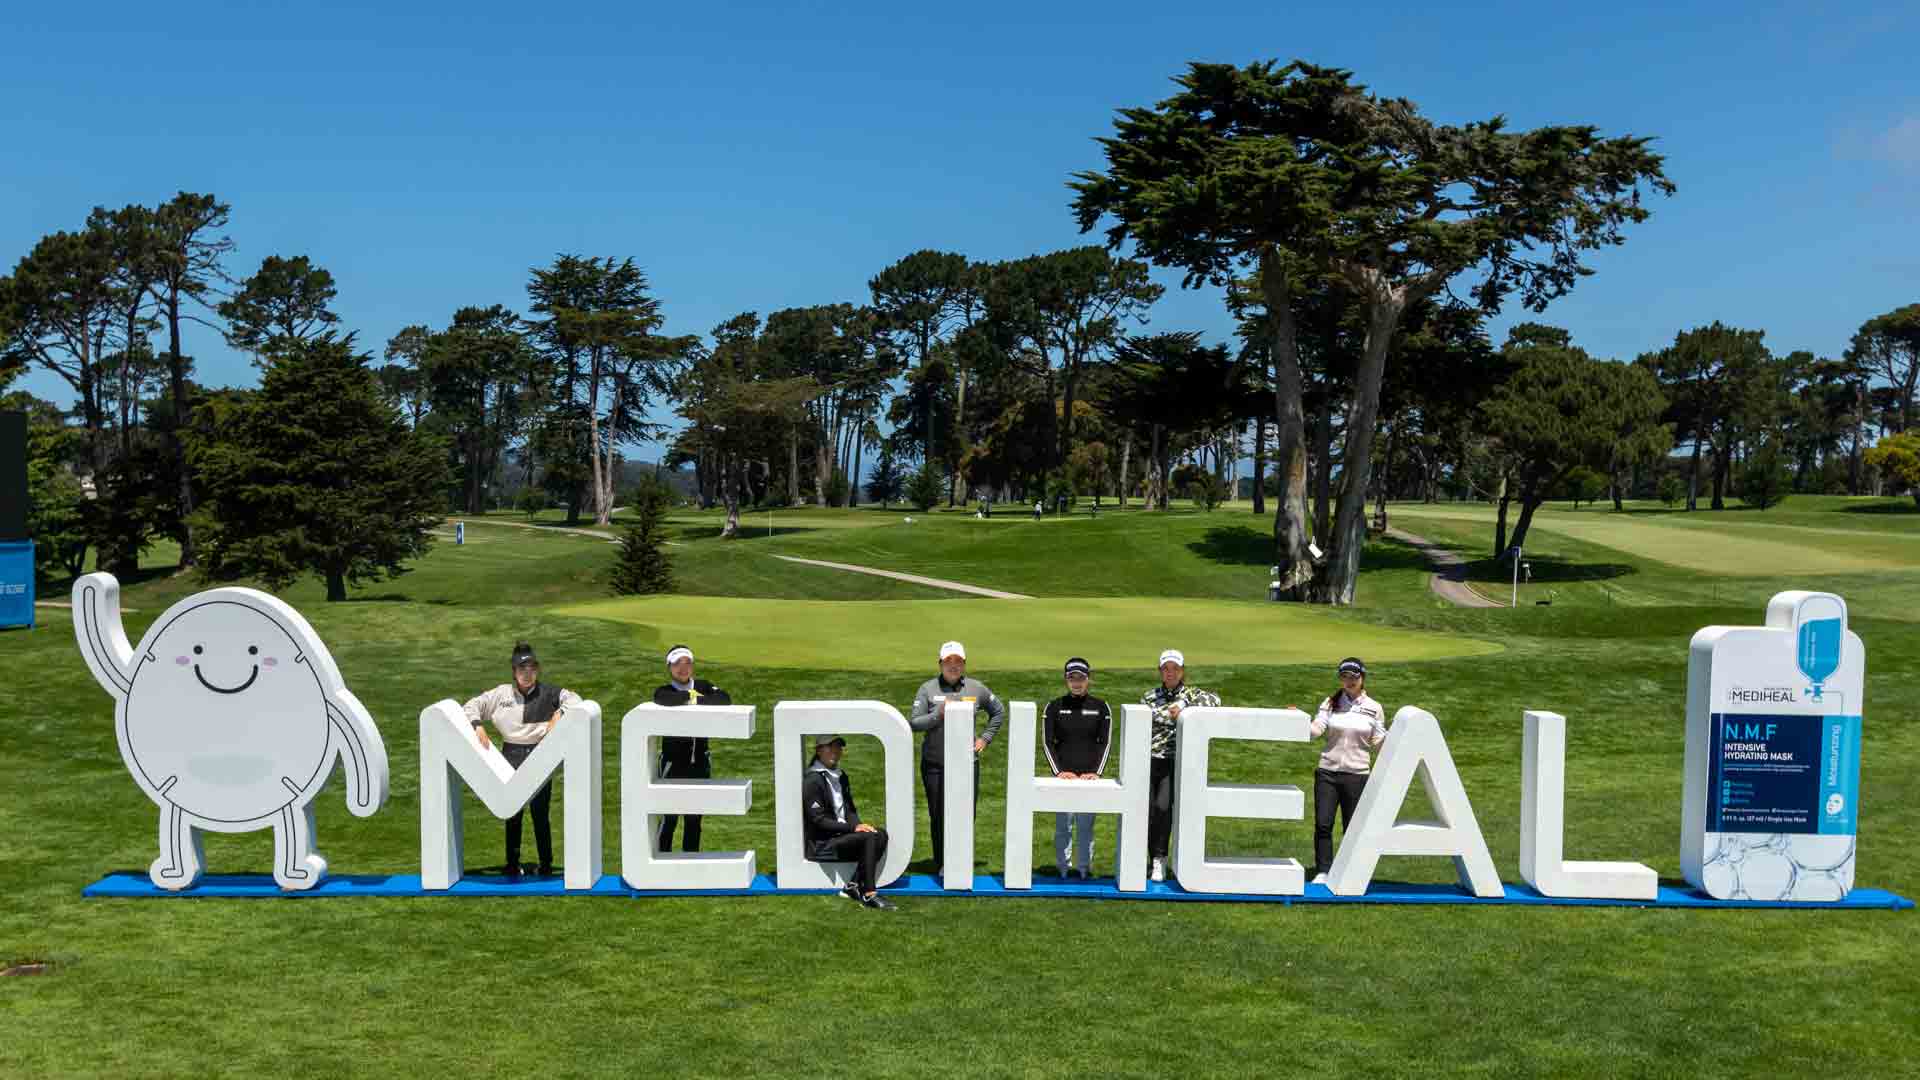 Players during a photo call ahead of the LPGA MEDIHEAL Championship.